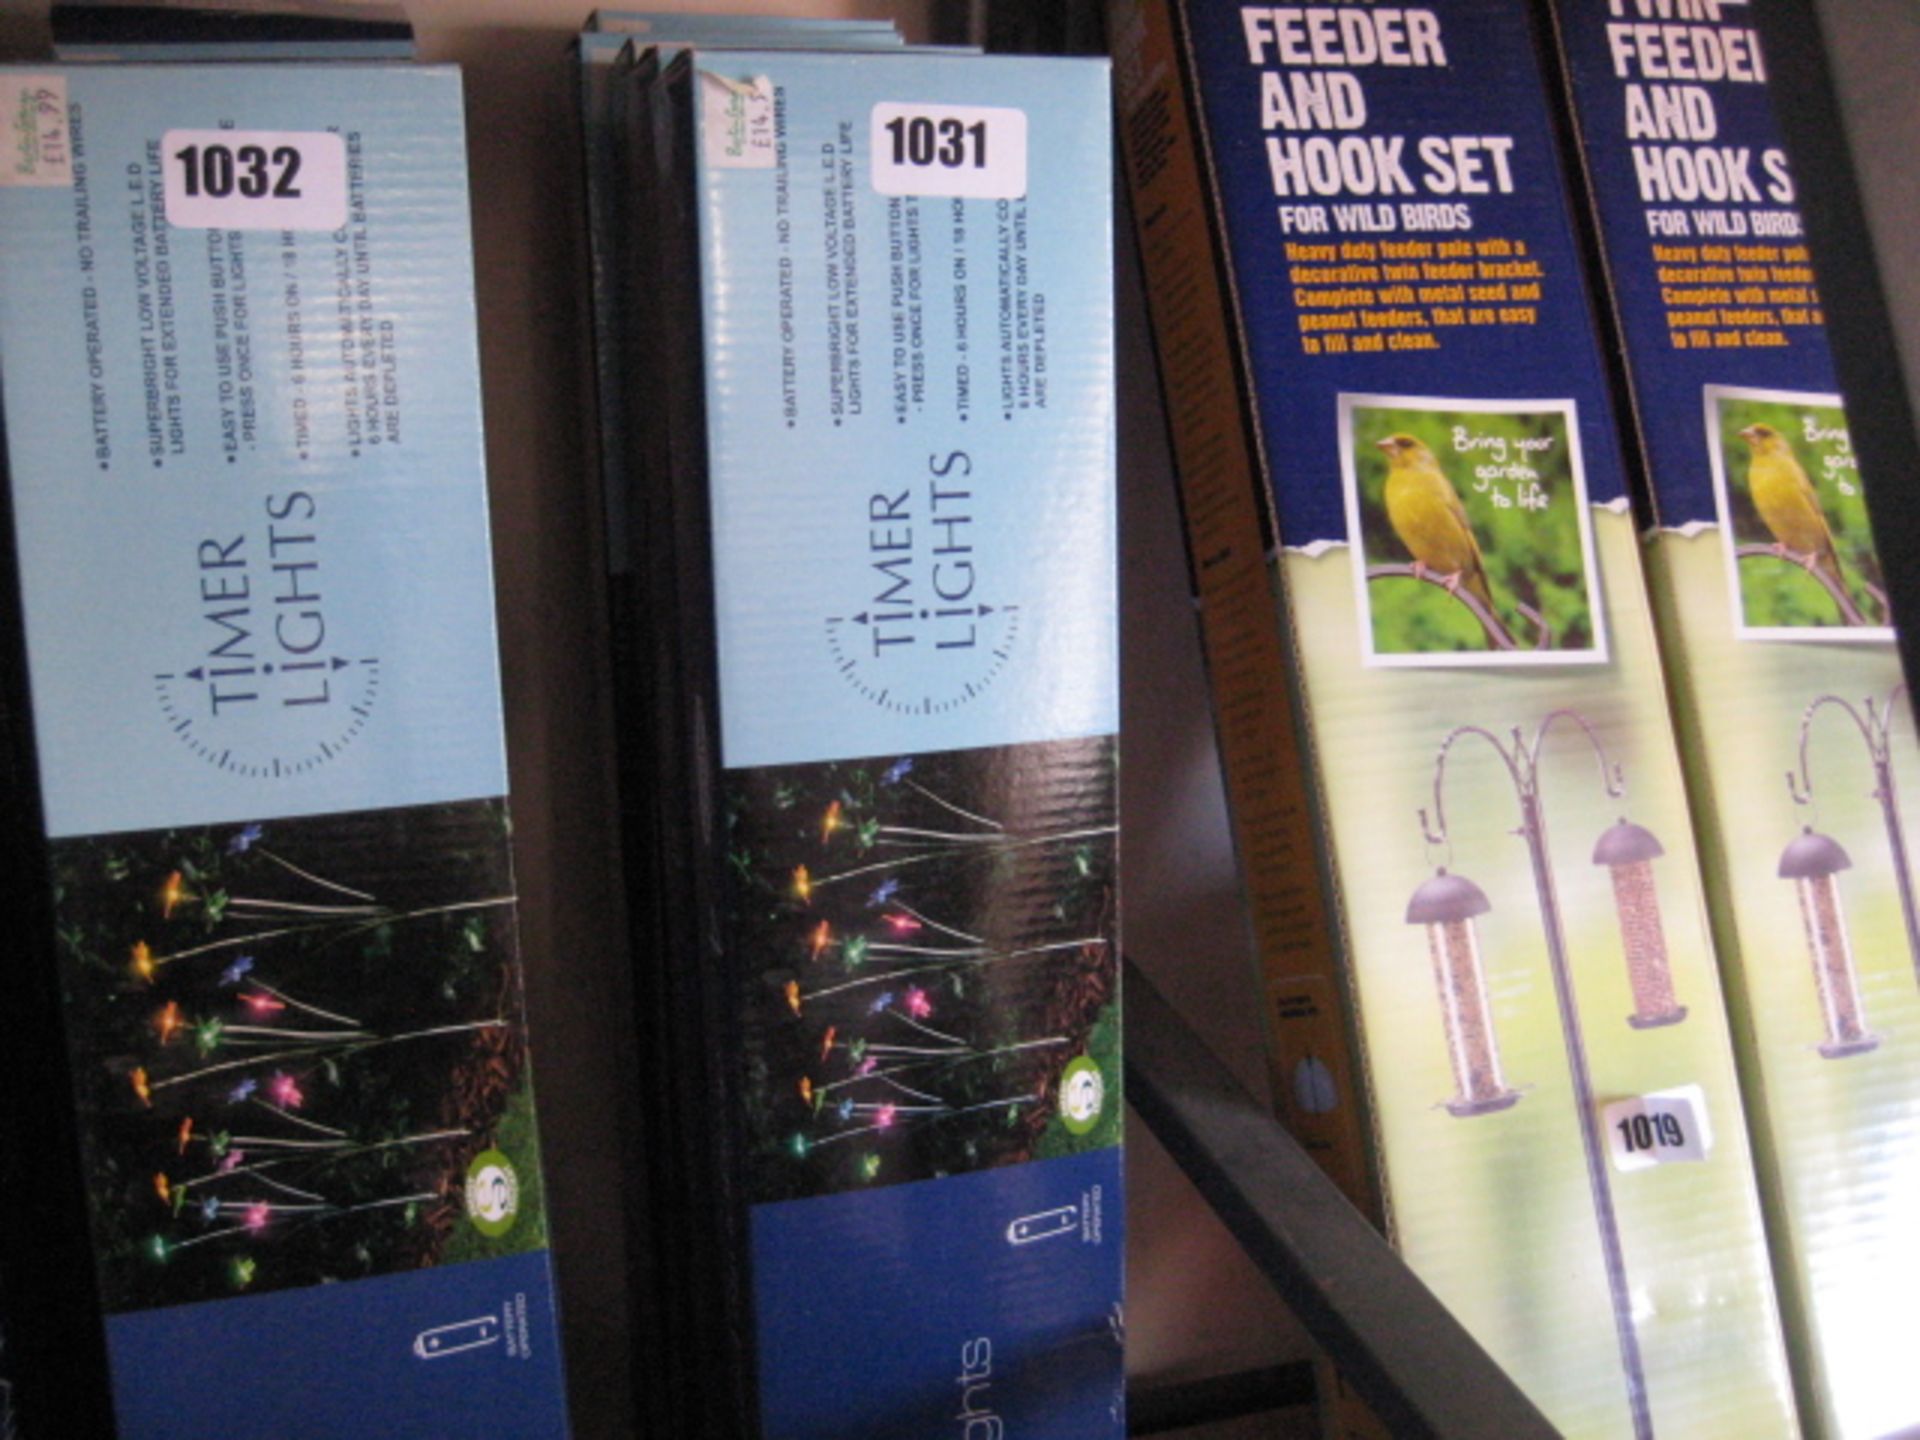 5 boxed sets of dragonfly path finder lights